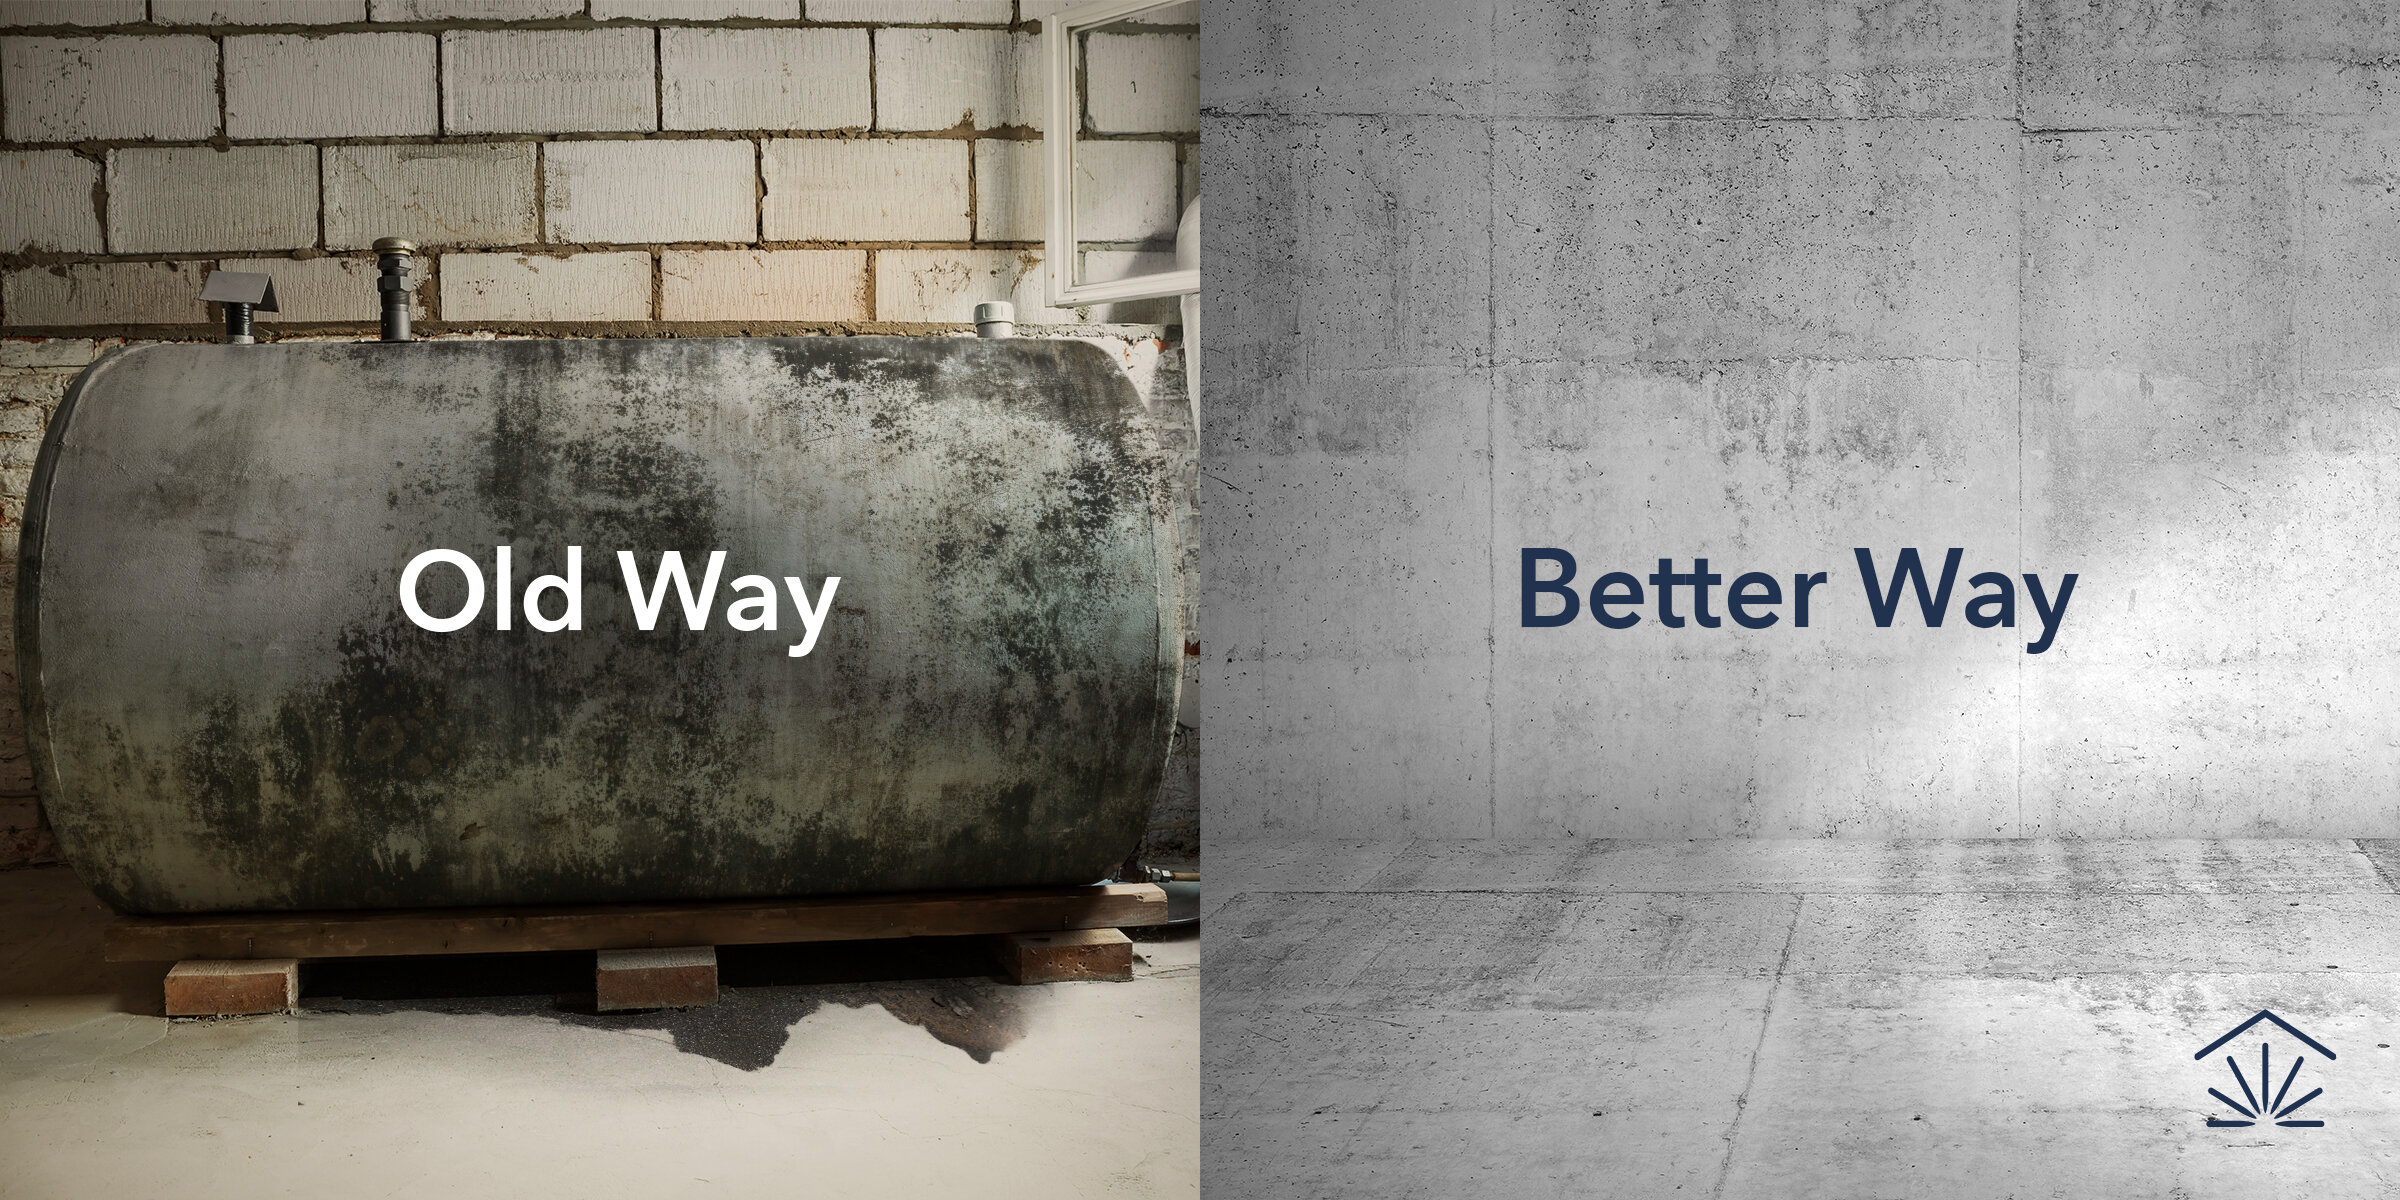 A side by side ad of a leaking oil tank, labeled 'Old Way' and an empty basement labeled 'Better way'.